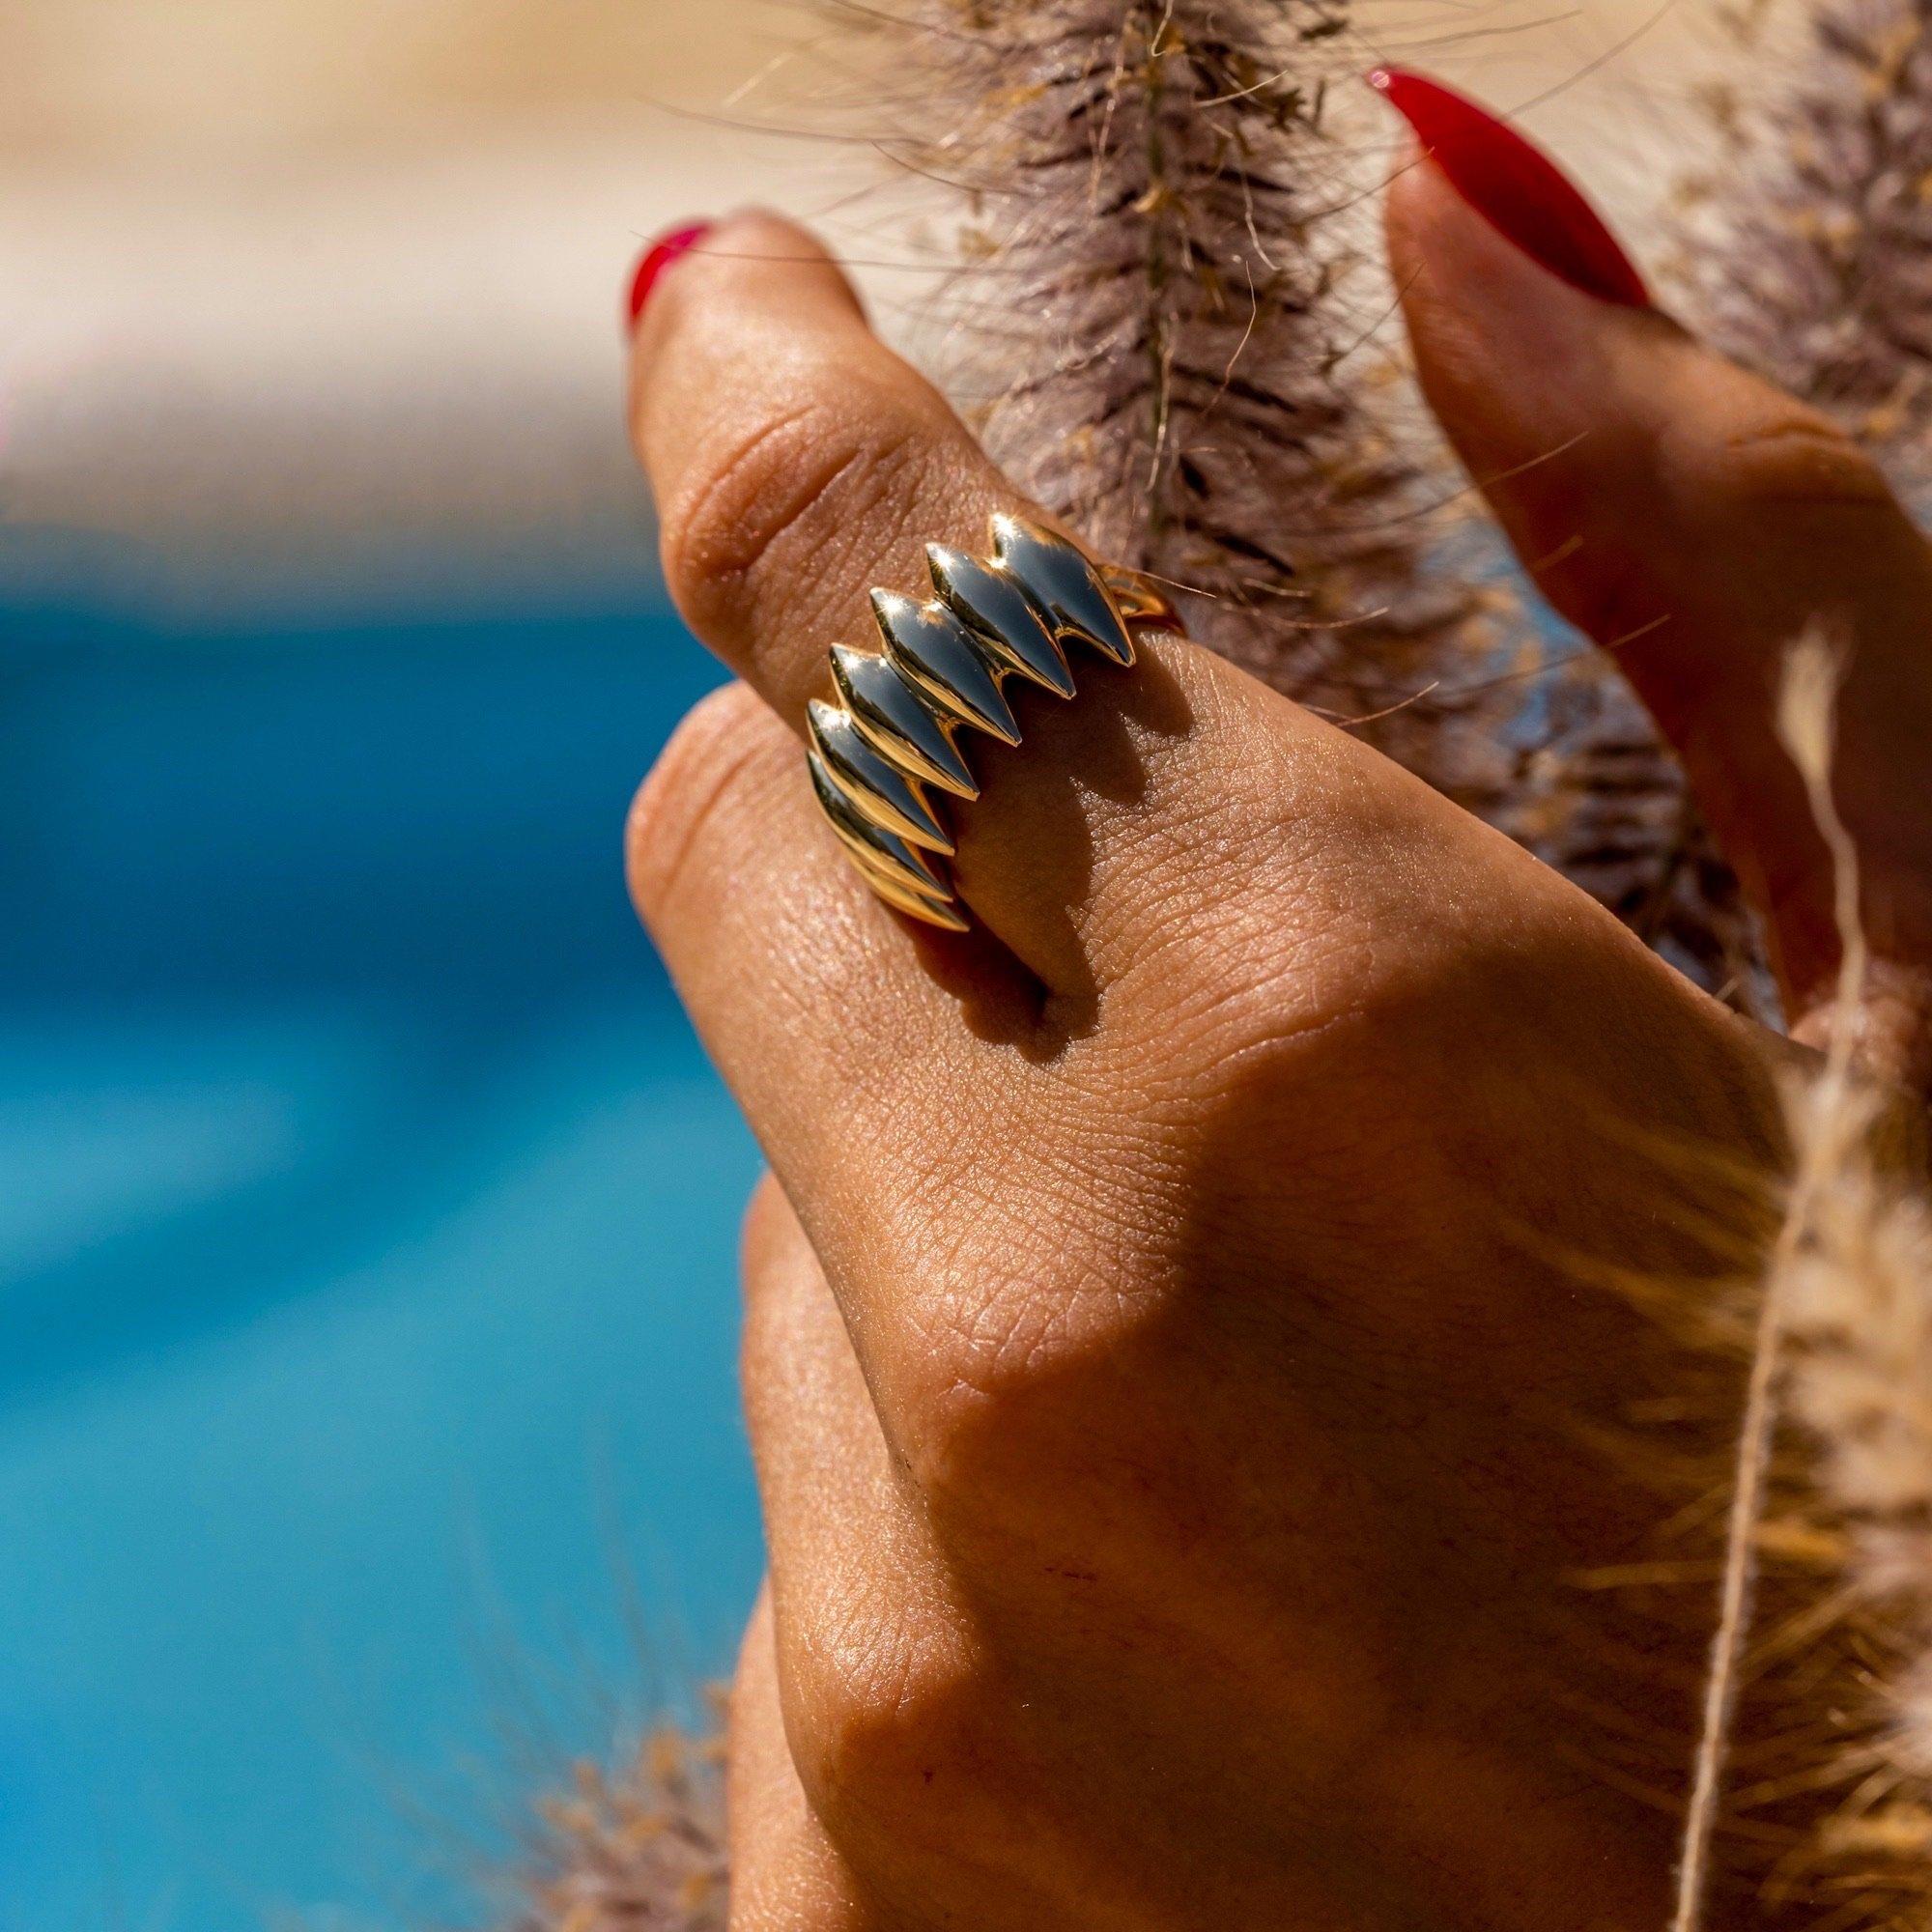 The ‘Grain array’, ring is crafted in 18K yellow gold, hallmarked in Cyprus. This stunning, sculptural ring comes in a highly polished finish and is very comfortable to wear as an everyday chevalier, middle or pointer finger ring. The ‘Grain array’,